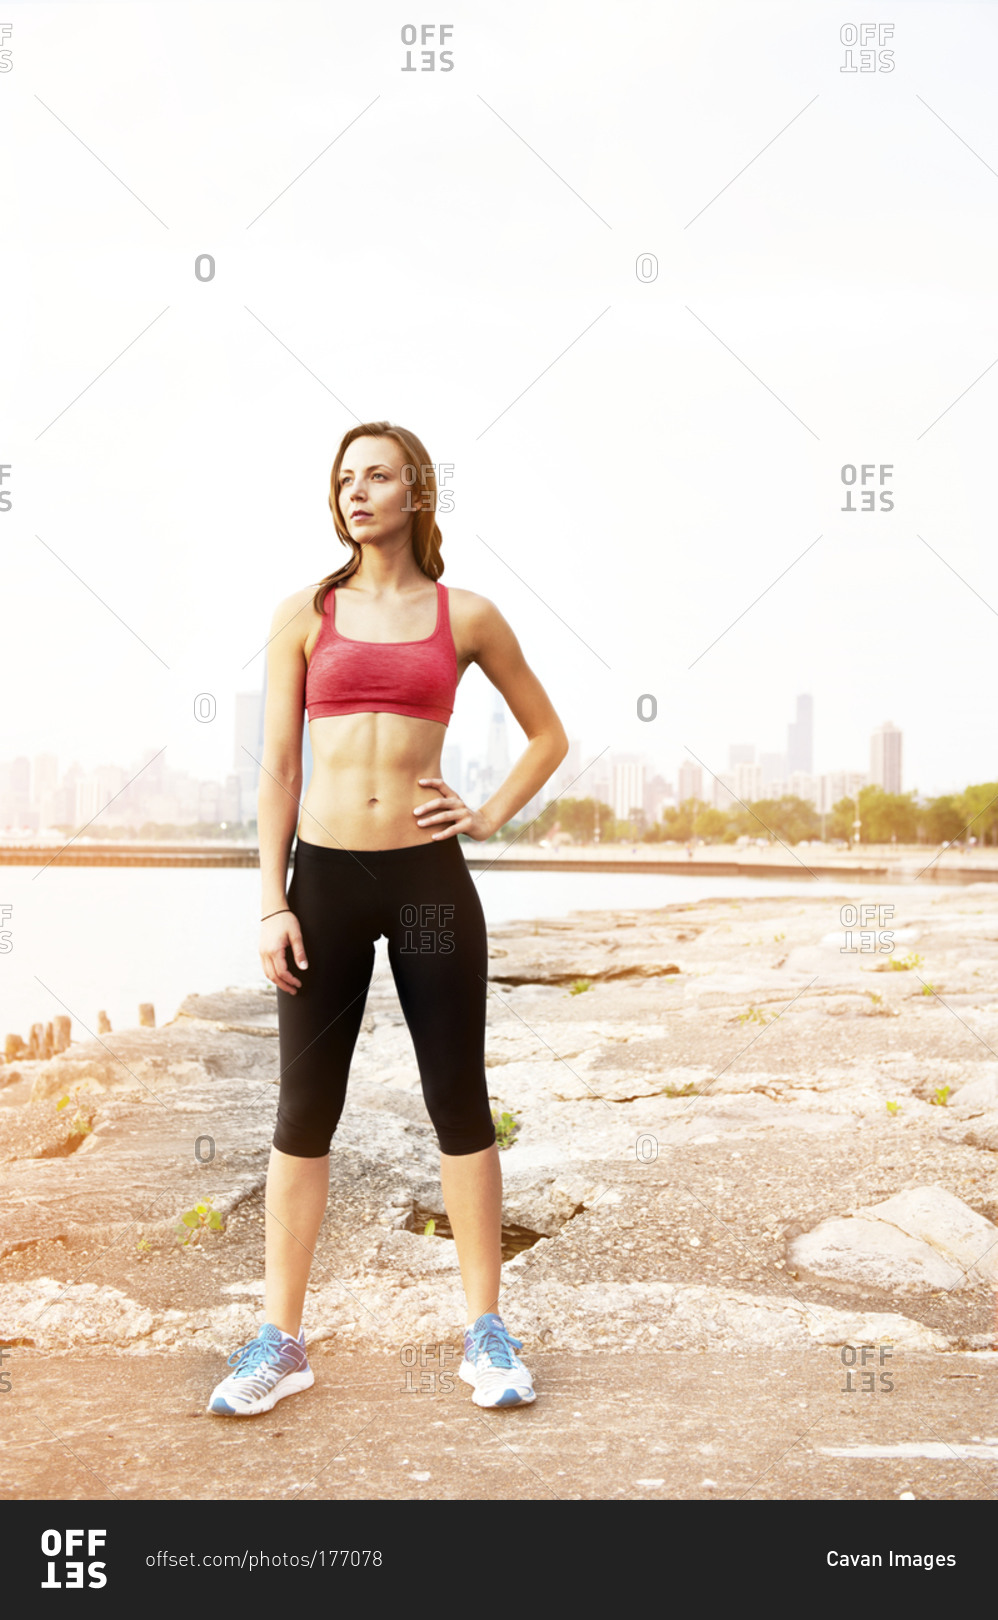 A woman in workout gear stands in front of the Chicago skyline